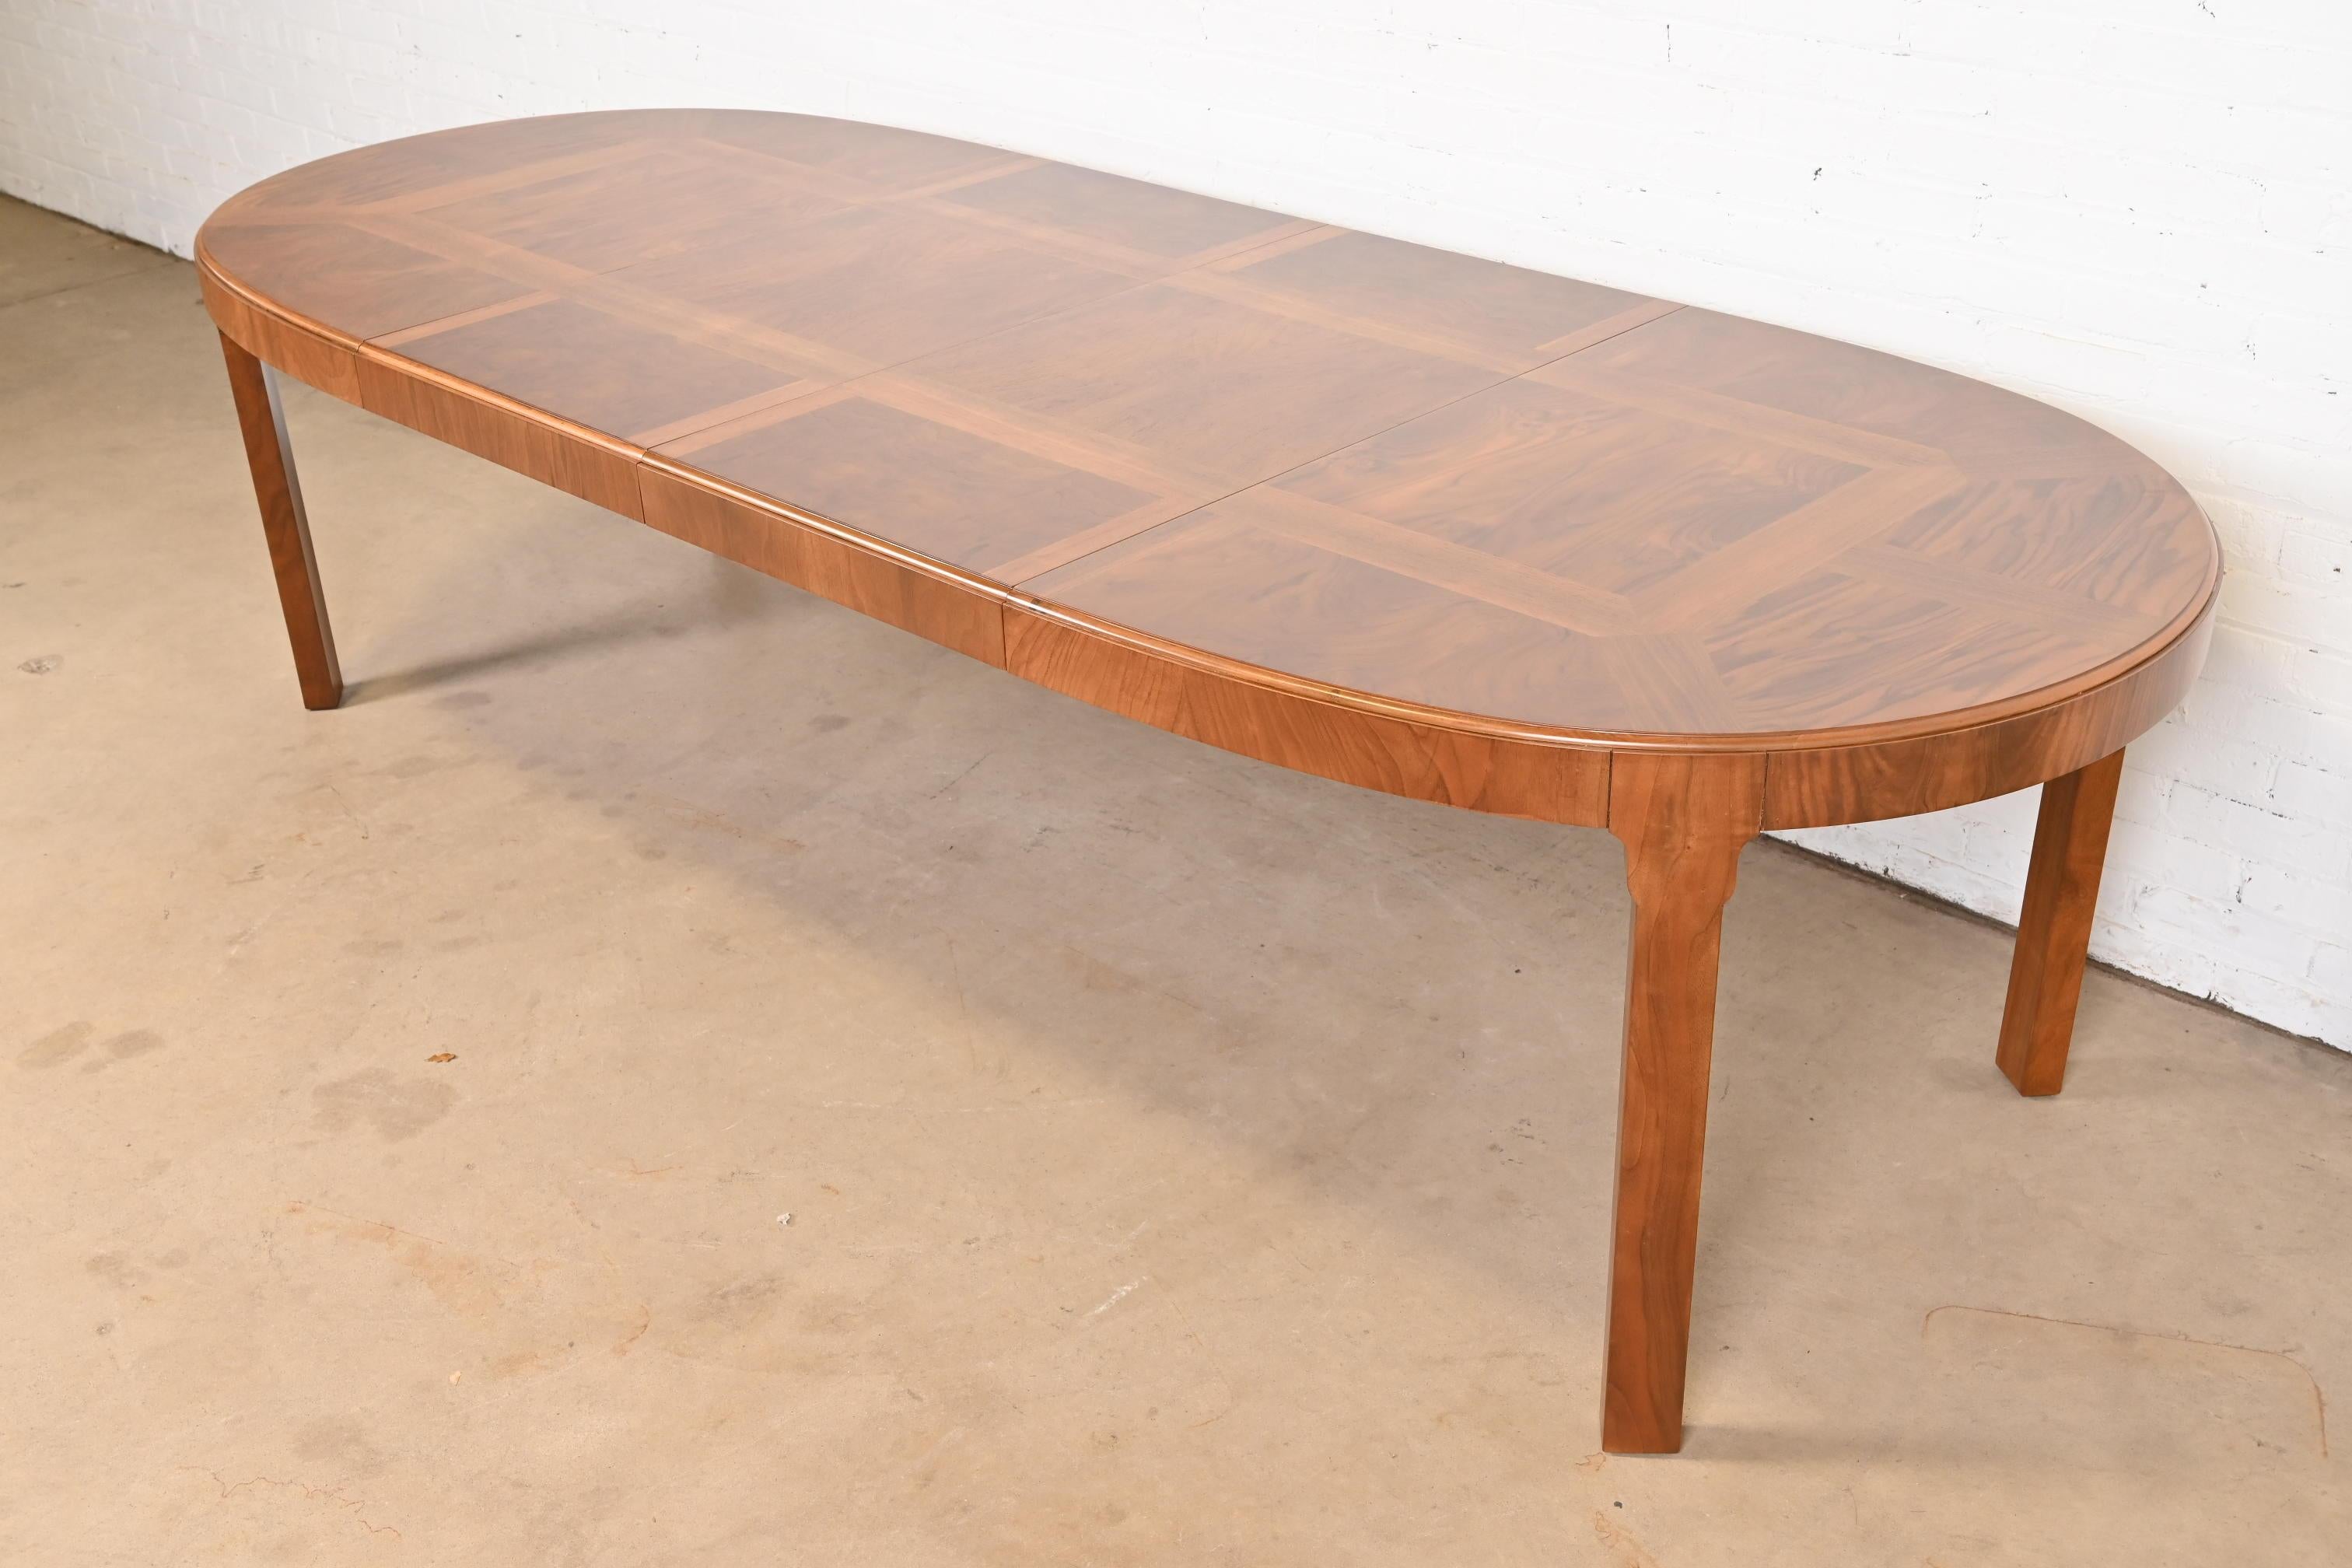 Drexel Heritage Mid-Century Modern Inlaid Burled Walnut Parquetry Dining Table In Good Condition For Sale In South Bend, IN